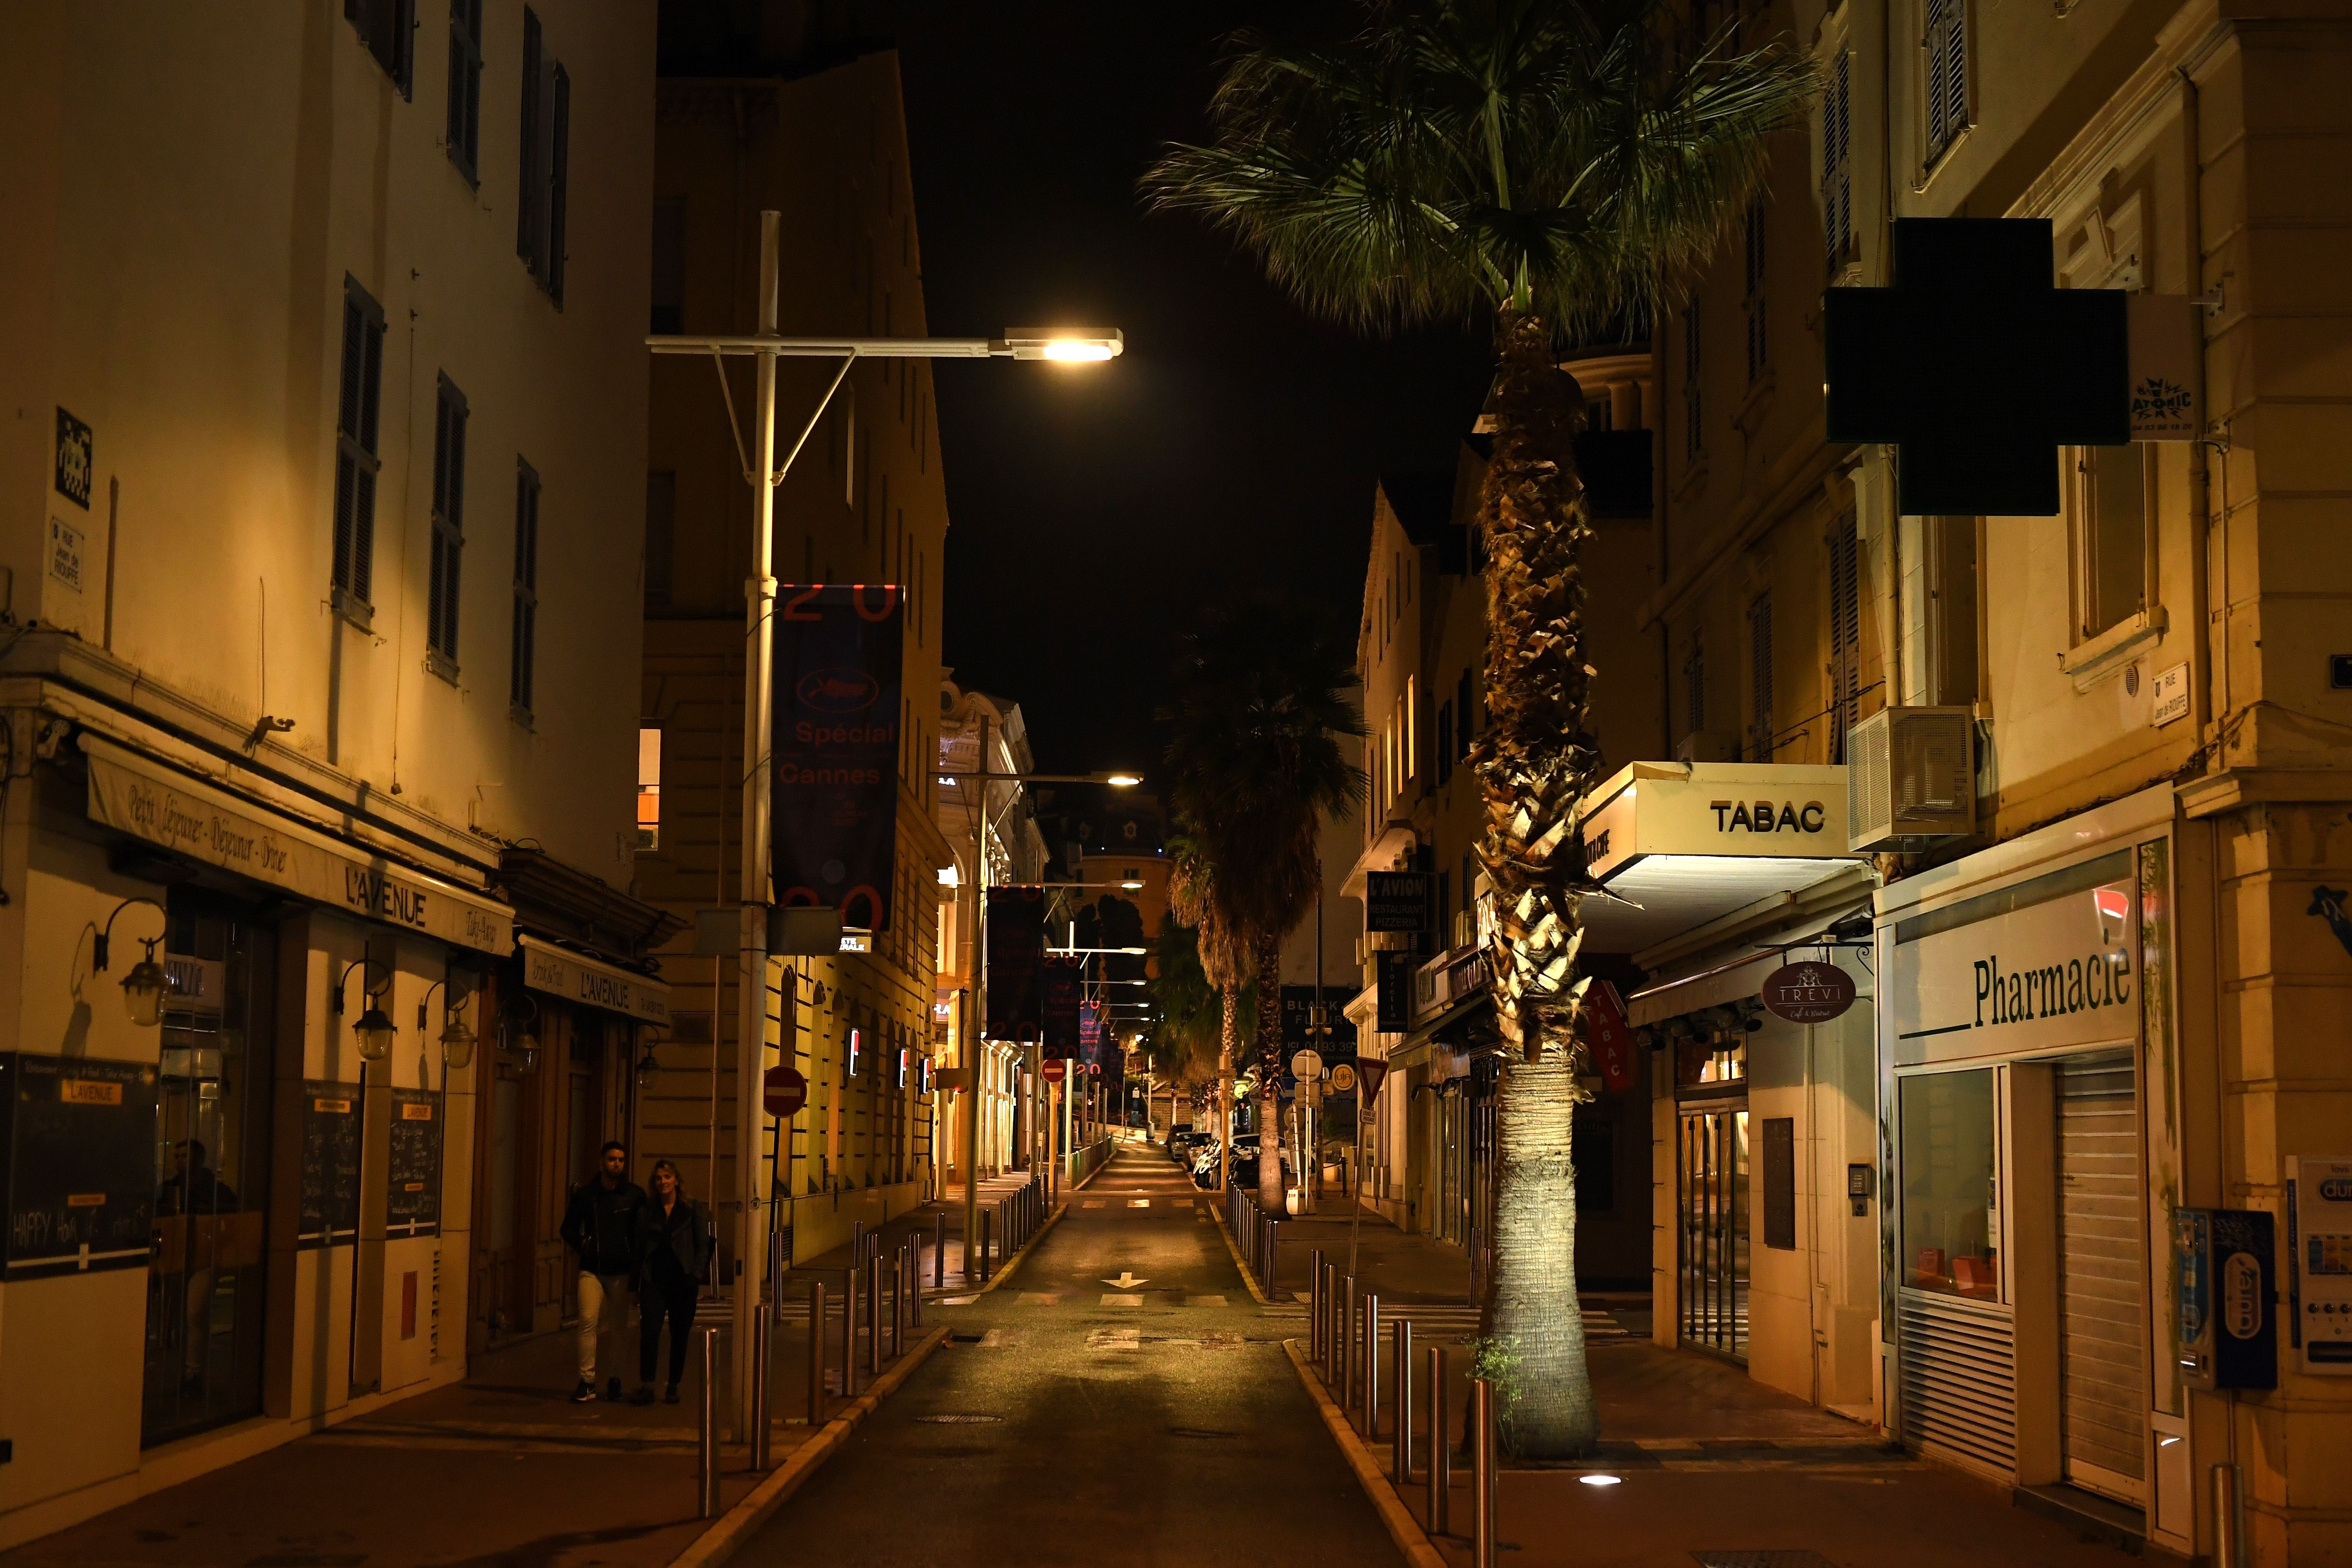 Pedestrians walk along an empty street on Oct. 25 in Cannes, on the French Riviera